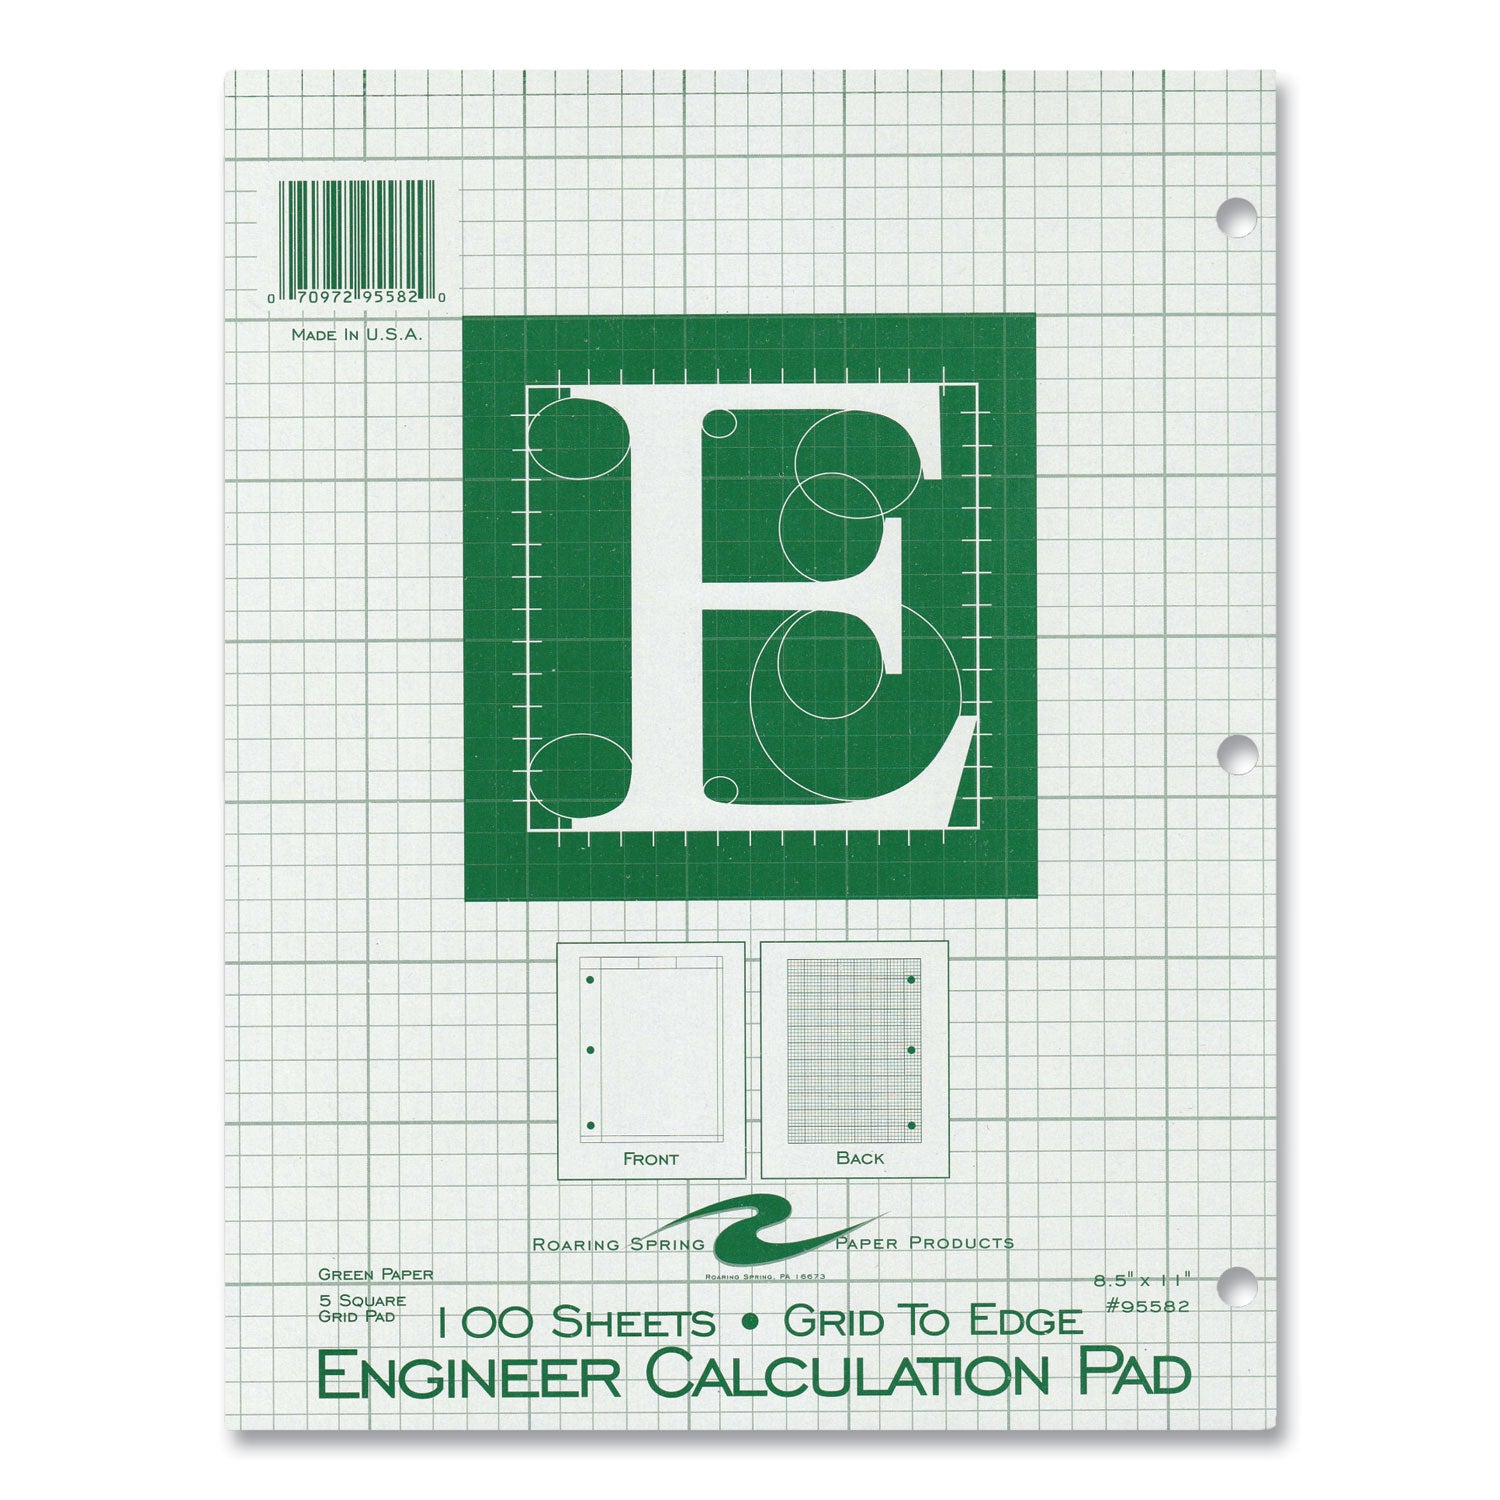 engineer-pad-125-margin-quad-rule-5-sq-in-1-sq-in-100-lt-green-85x11-sheets-pad-24-ct-ships-in-4-6-business-days_roa95582cs - 2